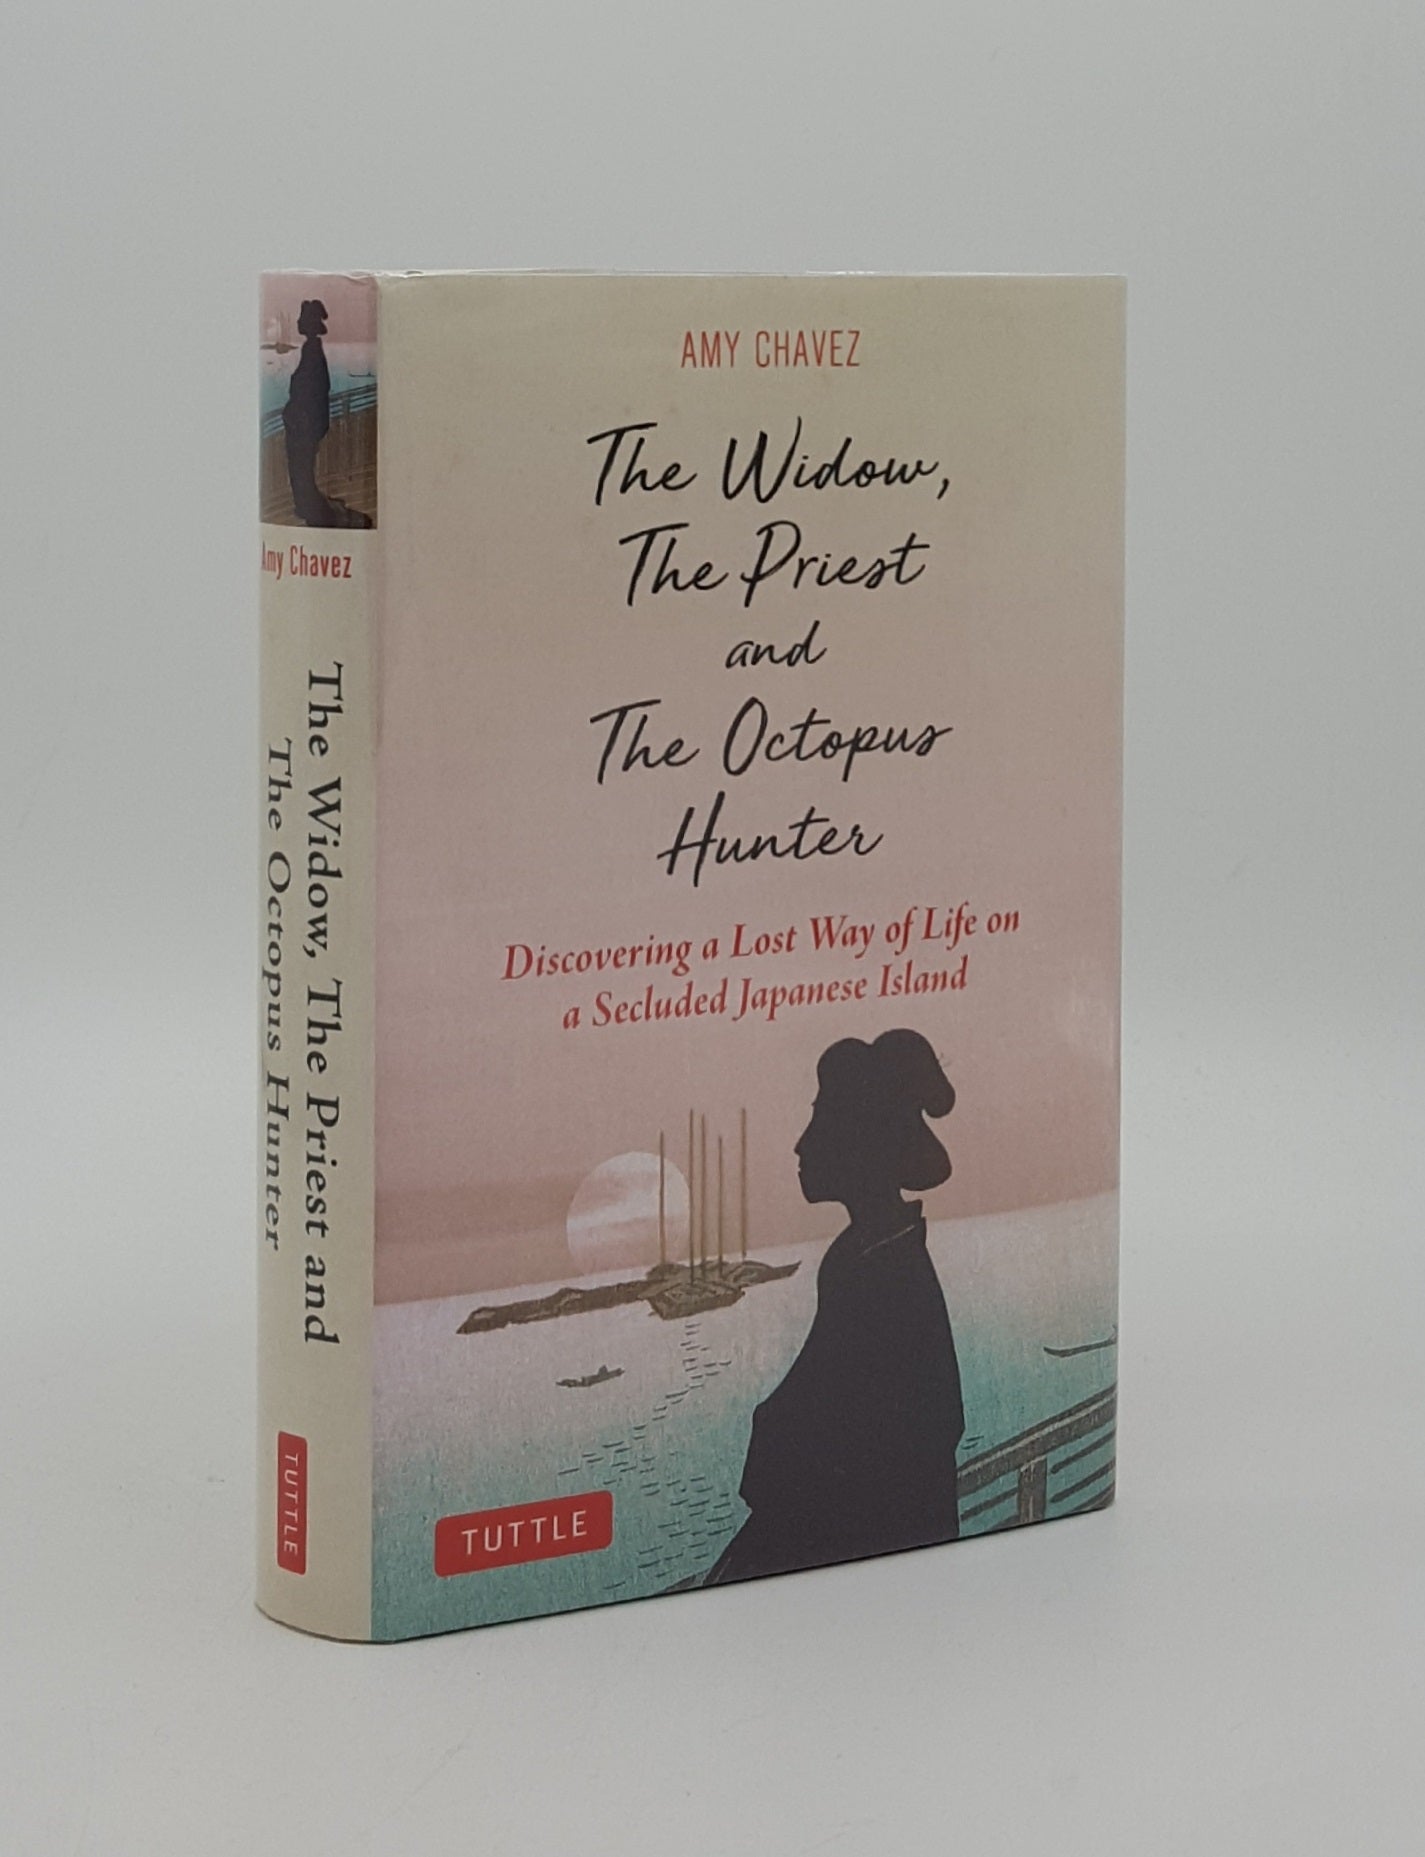 CHAVEZ Amy - The Widow the Priest and the Octopus Hunter Discovering a Lost Way of Life on a Secluded Japanese Island